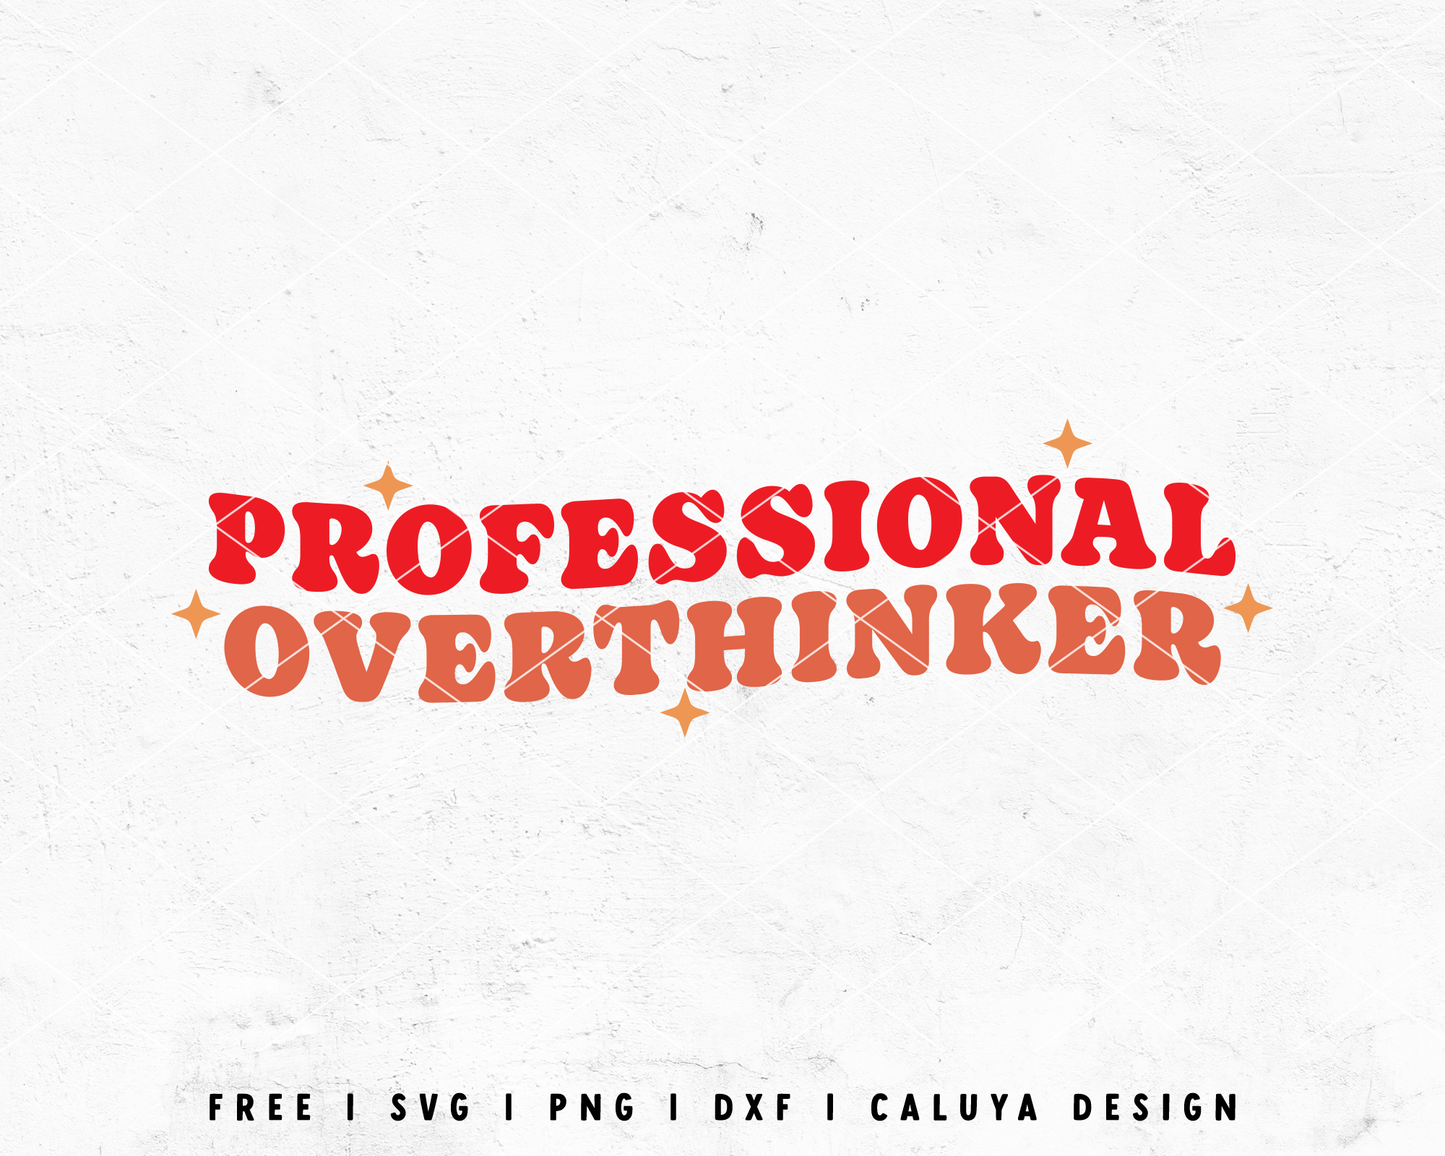 FREE Funny Quote SVG | Professional Overthinker SVG